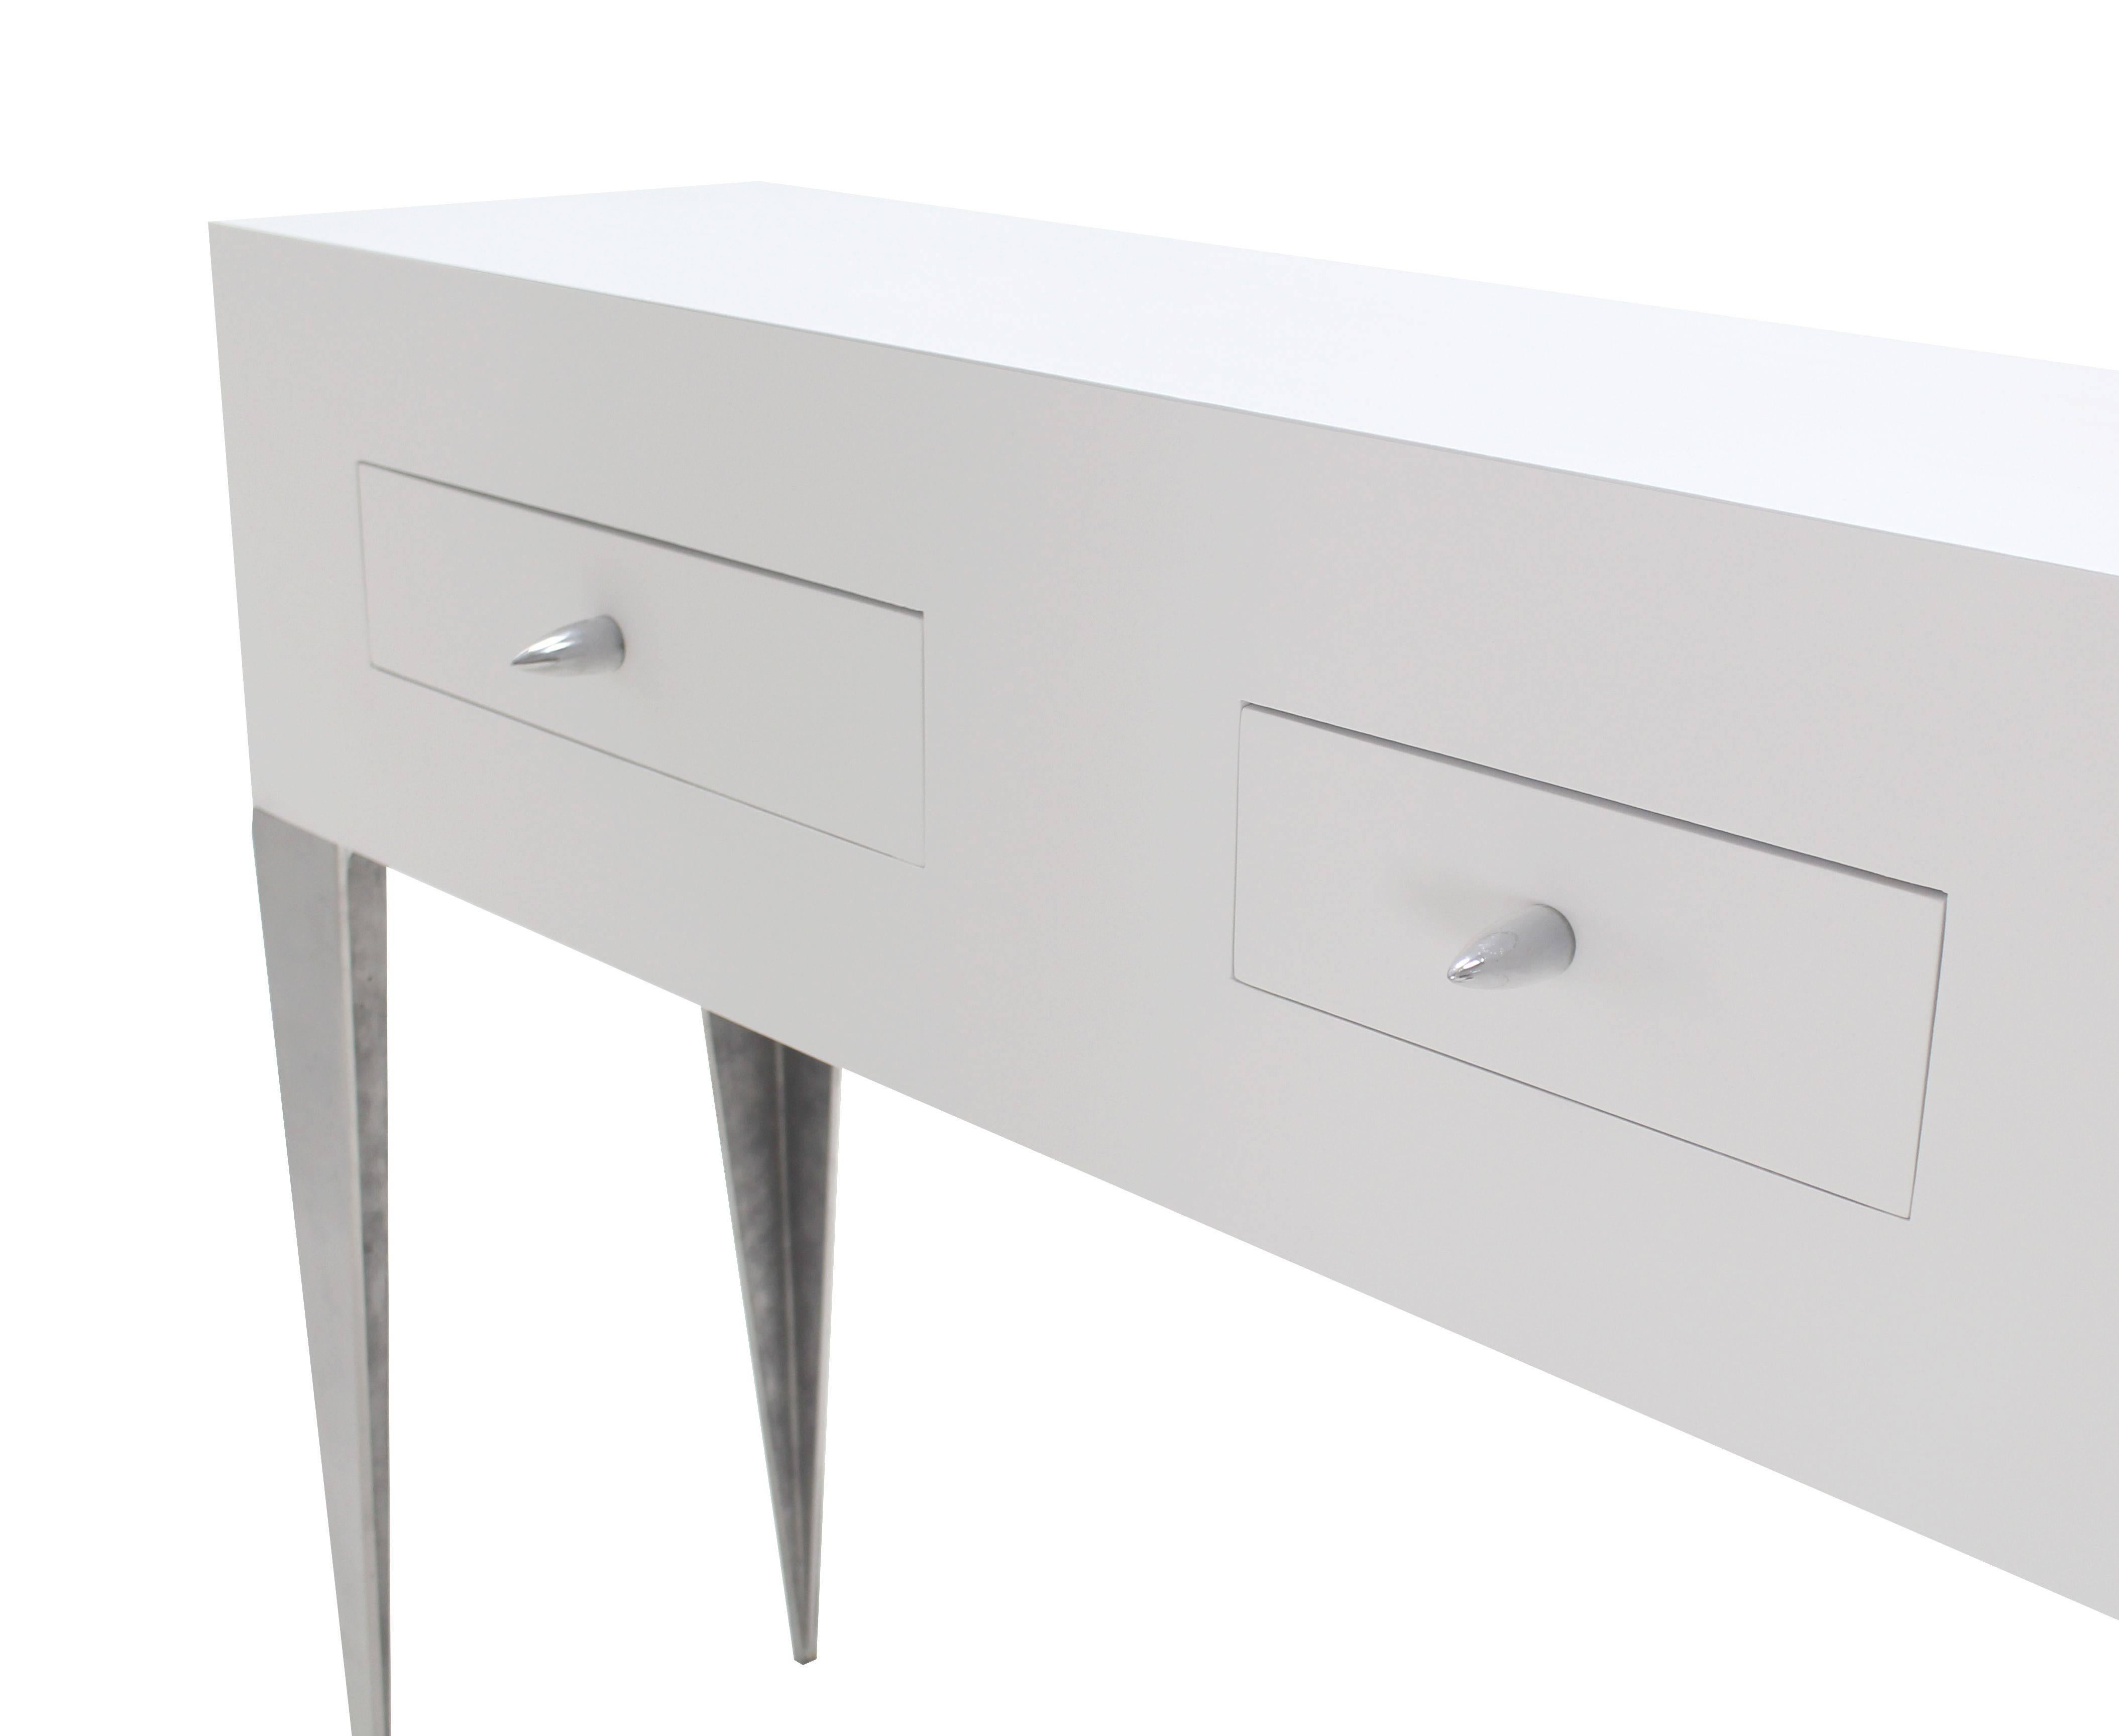 Mid-Century Modern White Lacquer Console Table Cabinet Tall Tempered Legs Bullet Shape Pull 3 Drawe